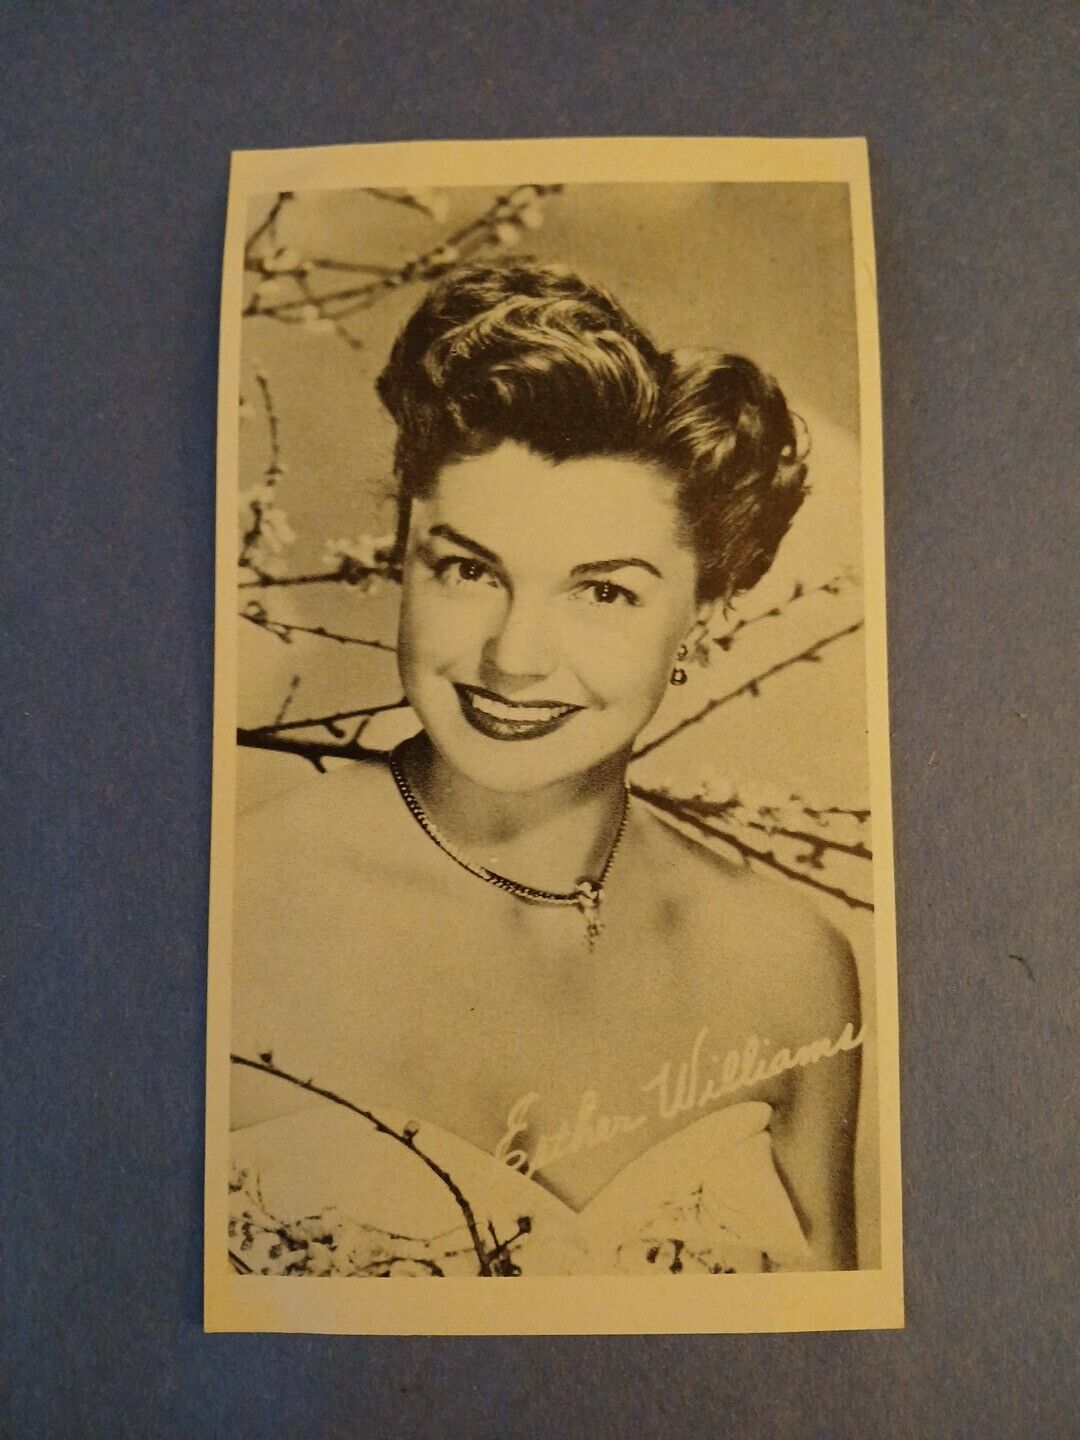 VINTAGE PUBLICITY PHOTO OF ACTRESS ESTHER WILLIAMS